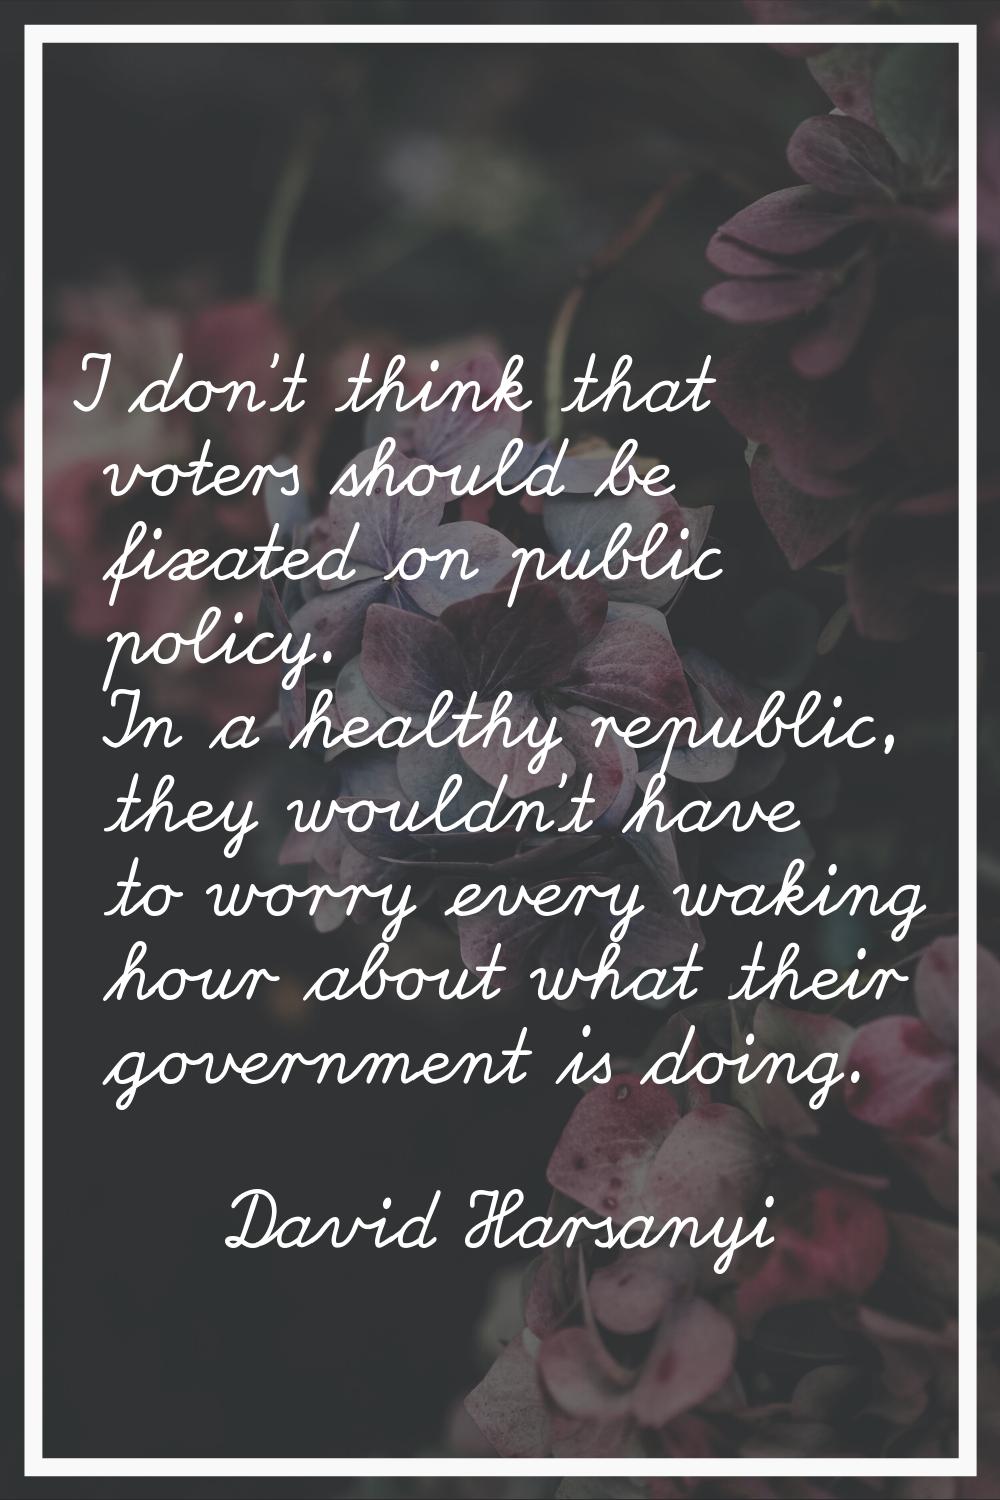 I don't think that voters should be fixated on public policy. In a healthy republic, they wouldn't 